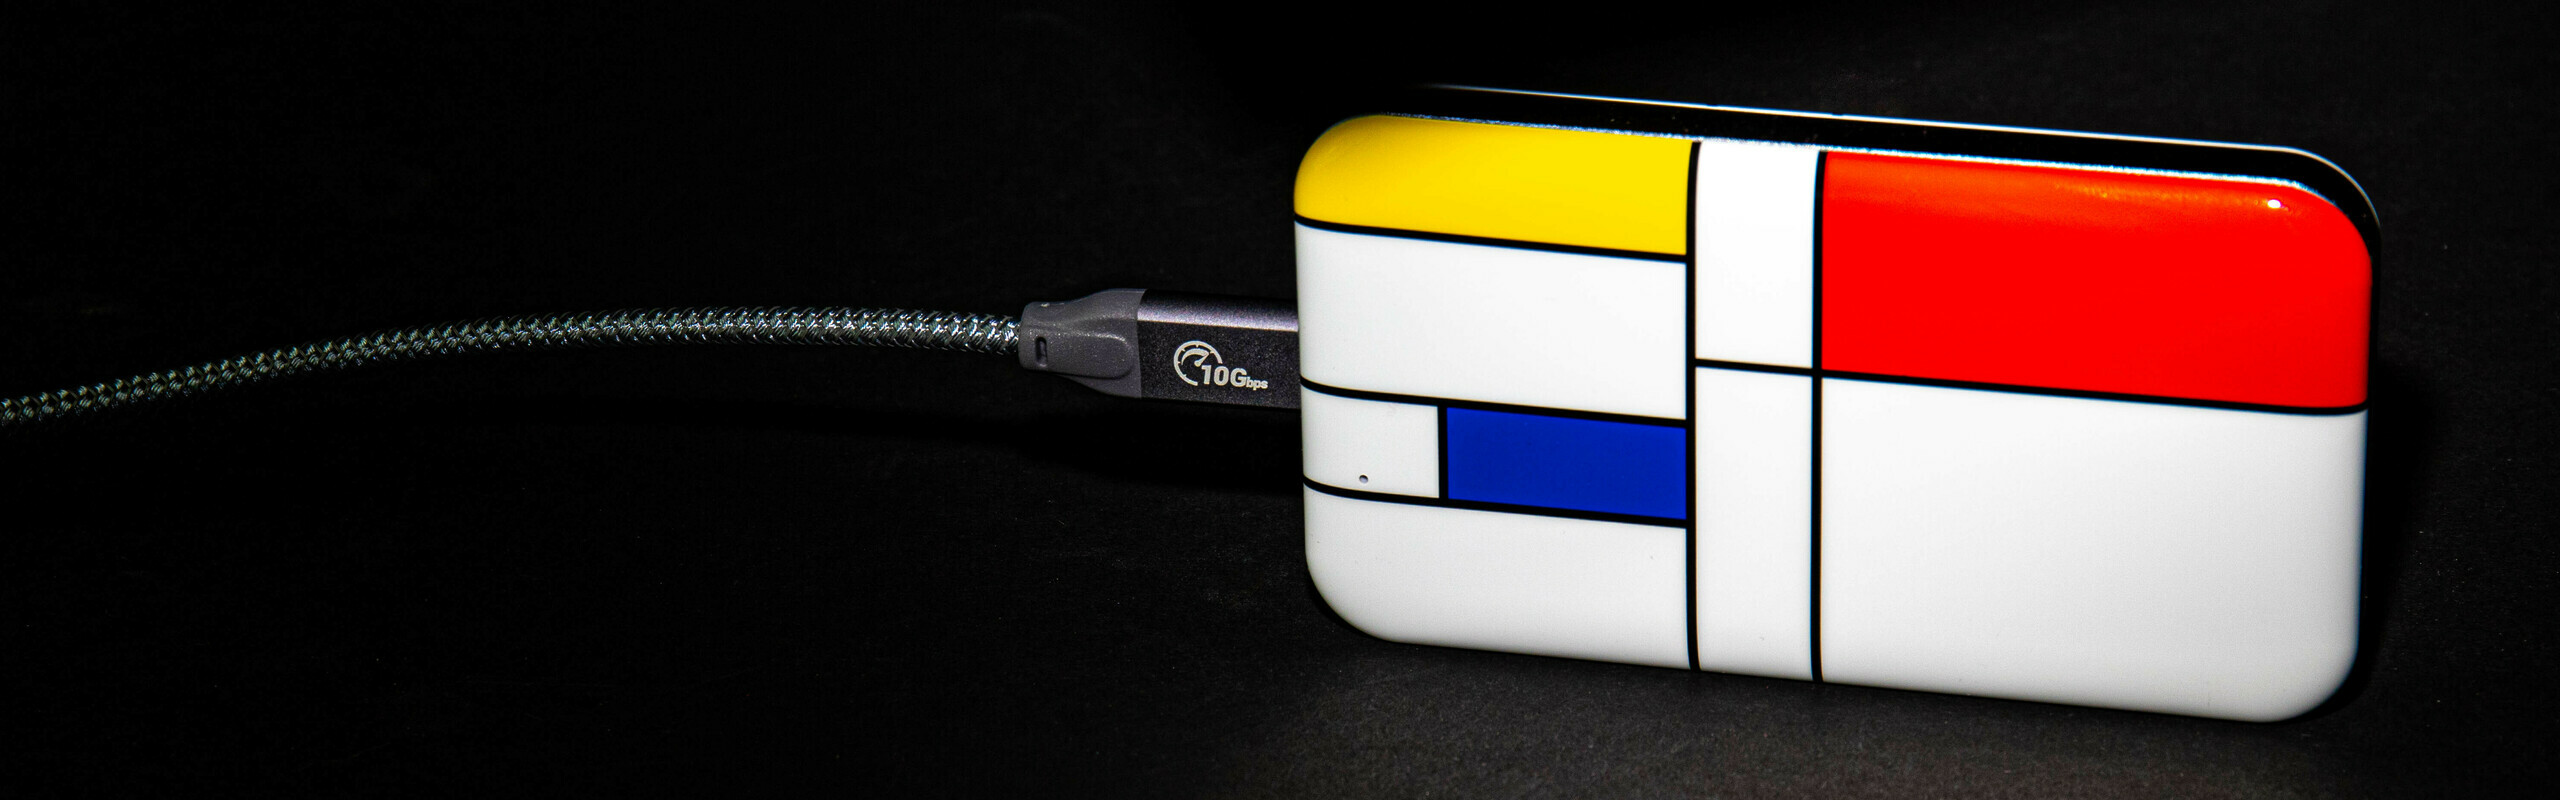 Mondrian Chinese Version – Orico Portable SSD Review